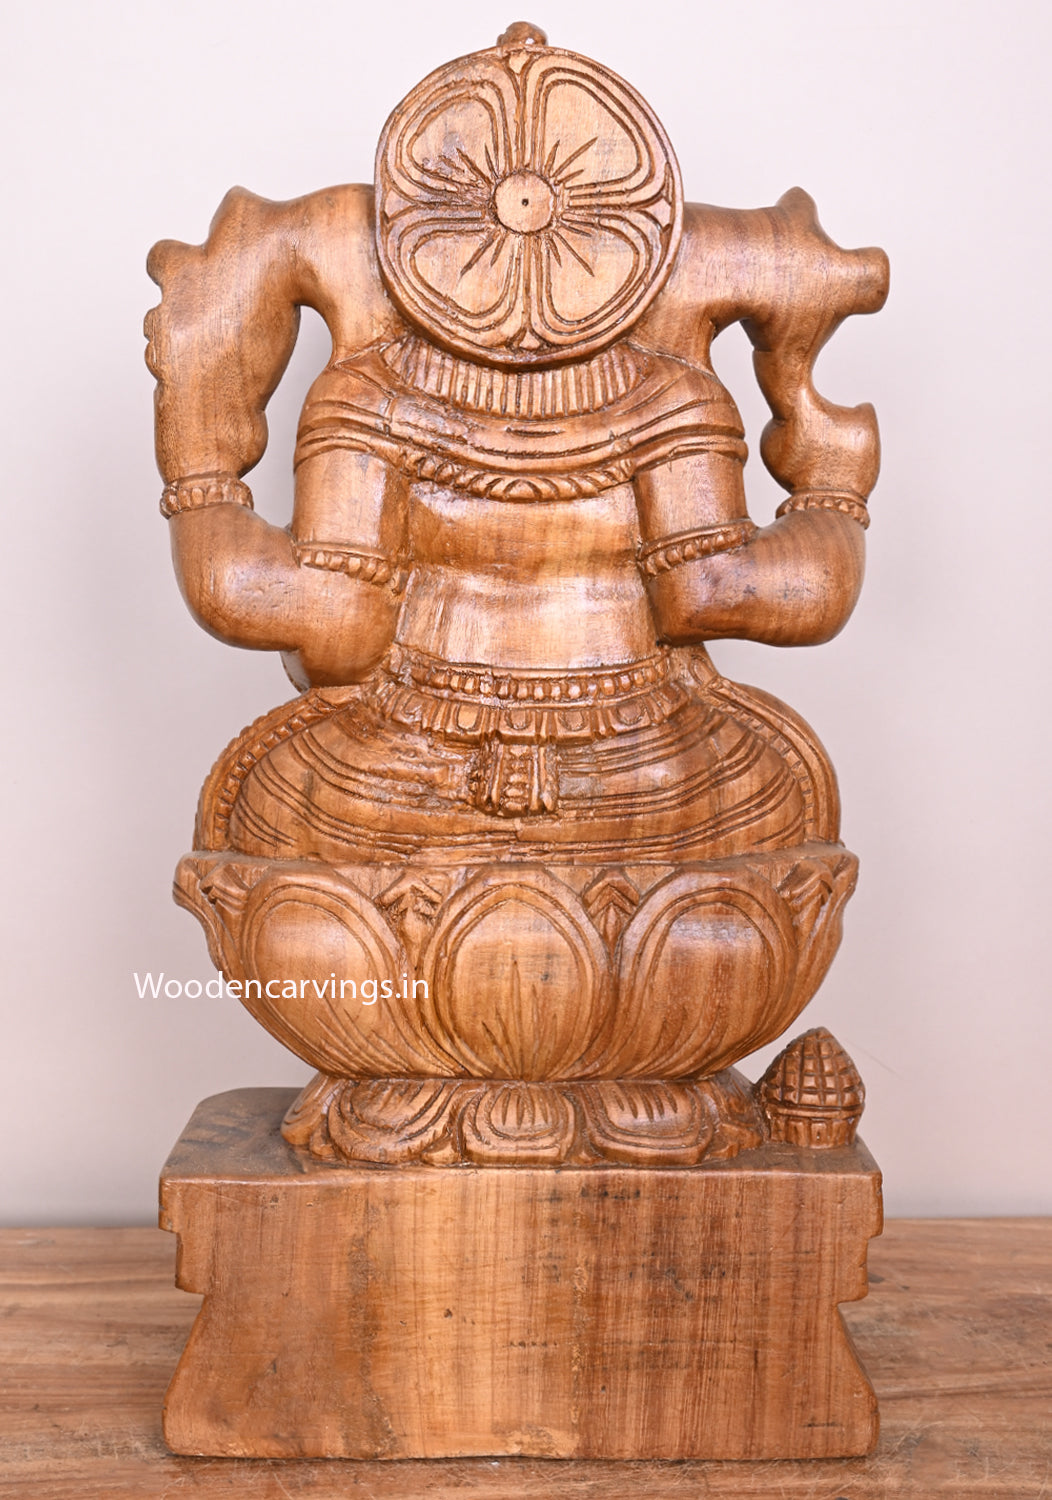 Ready For Your Beautiful Home Polished Blessing Ganapathy Holding Ladoo in His Hand Handcraft Sculpture 24"